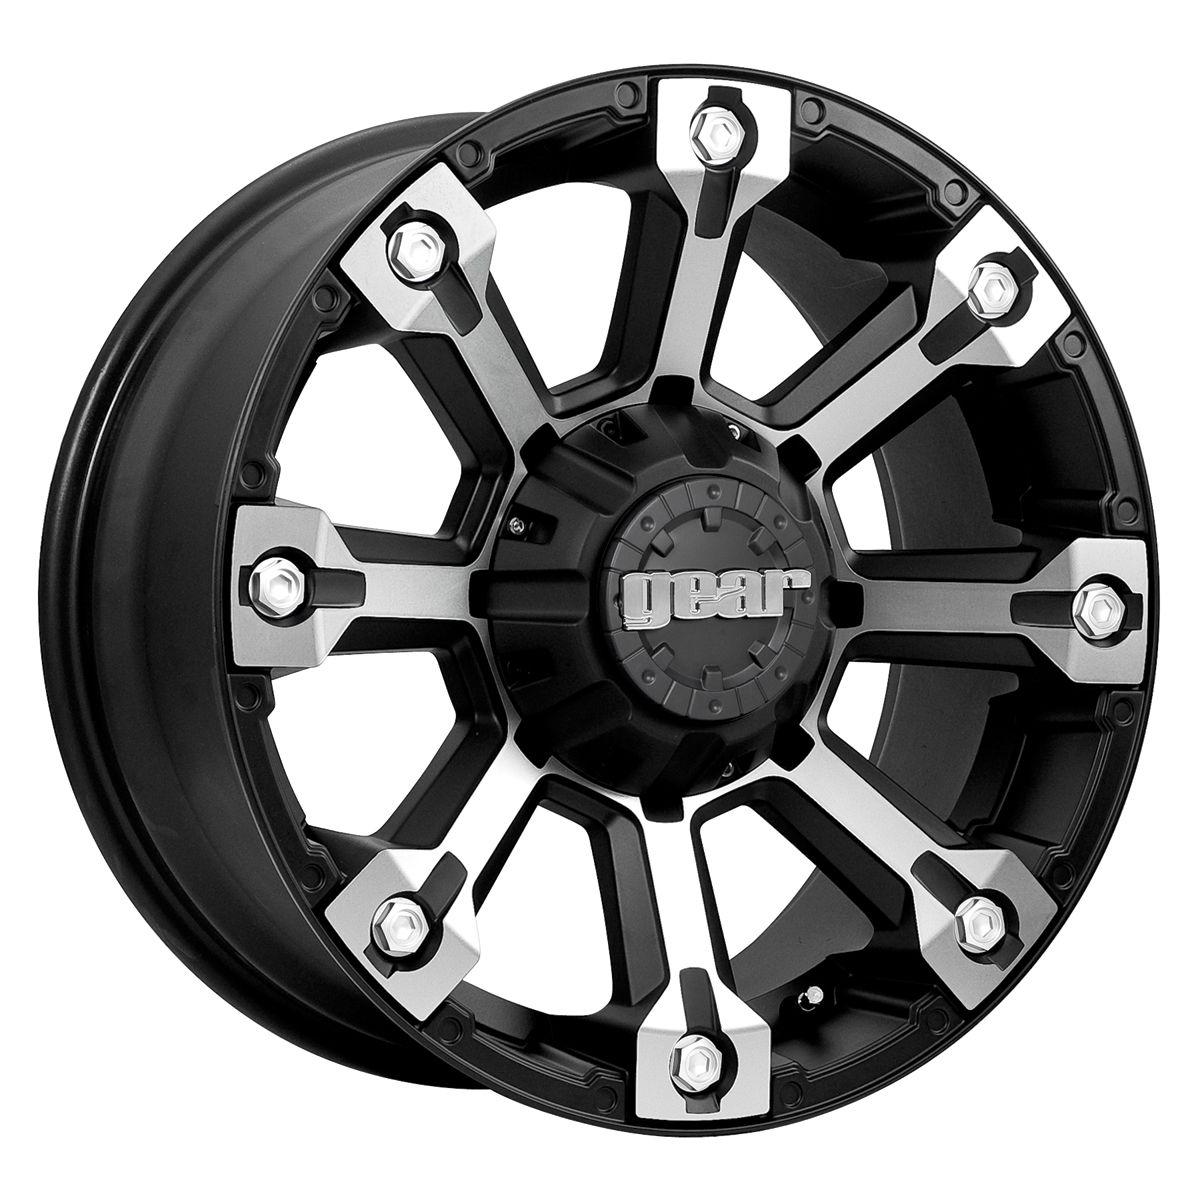 719MB Backcountry 20X9 (5-5.50) Machined w/ Carbon Black Accents